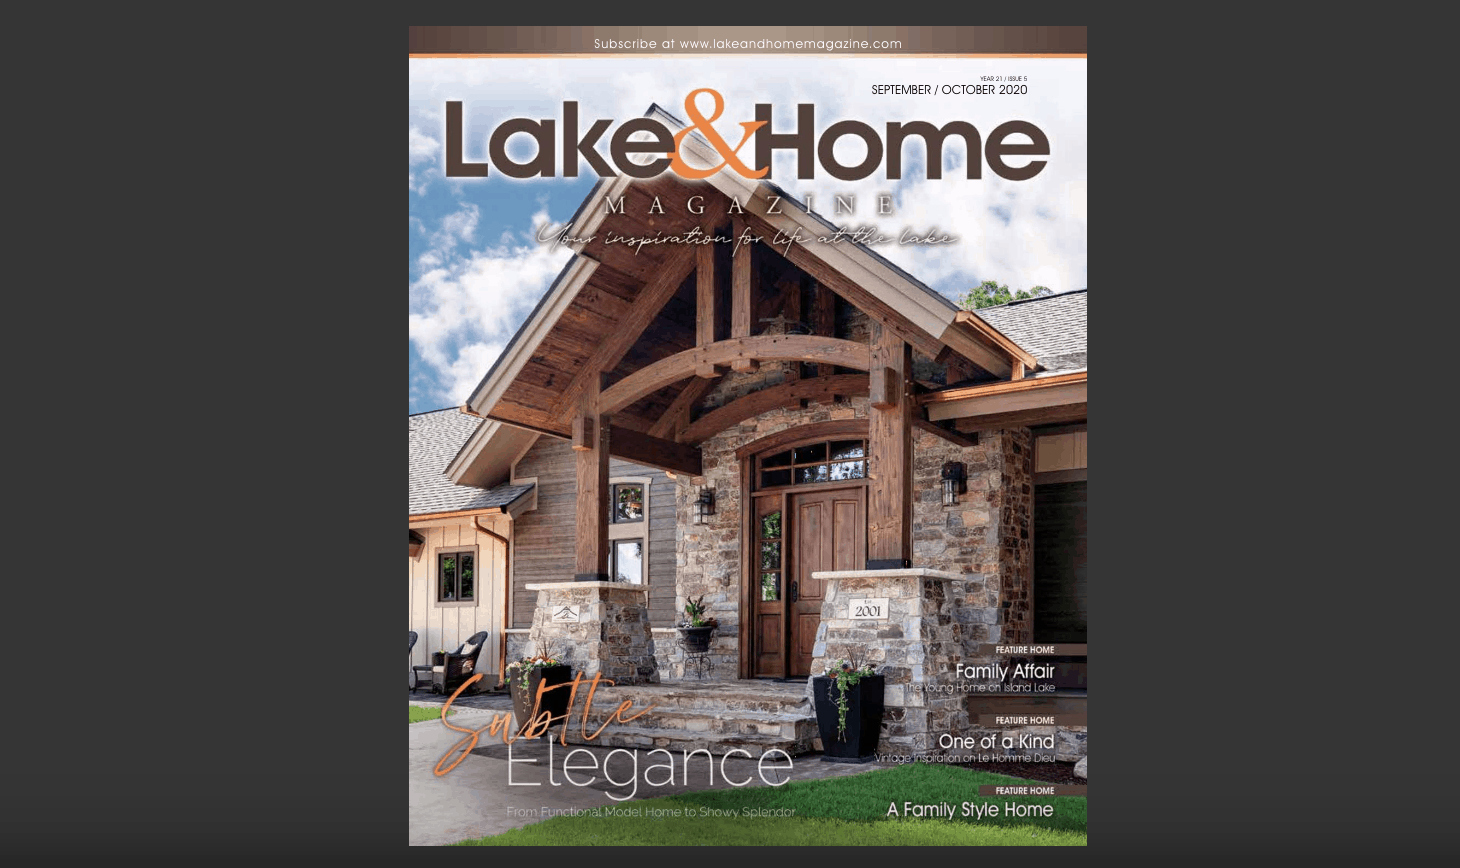 Featured in the Sept|Oct 2020 issue of Lake & Home Magazine